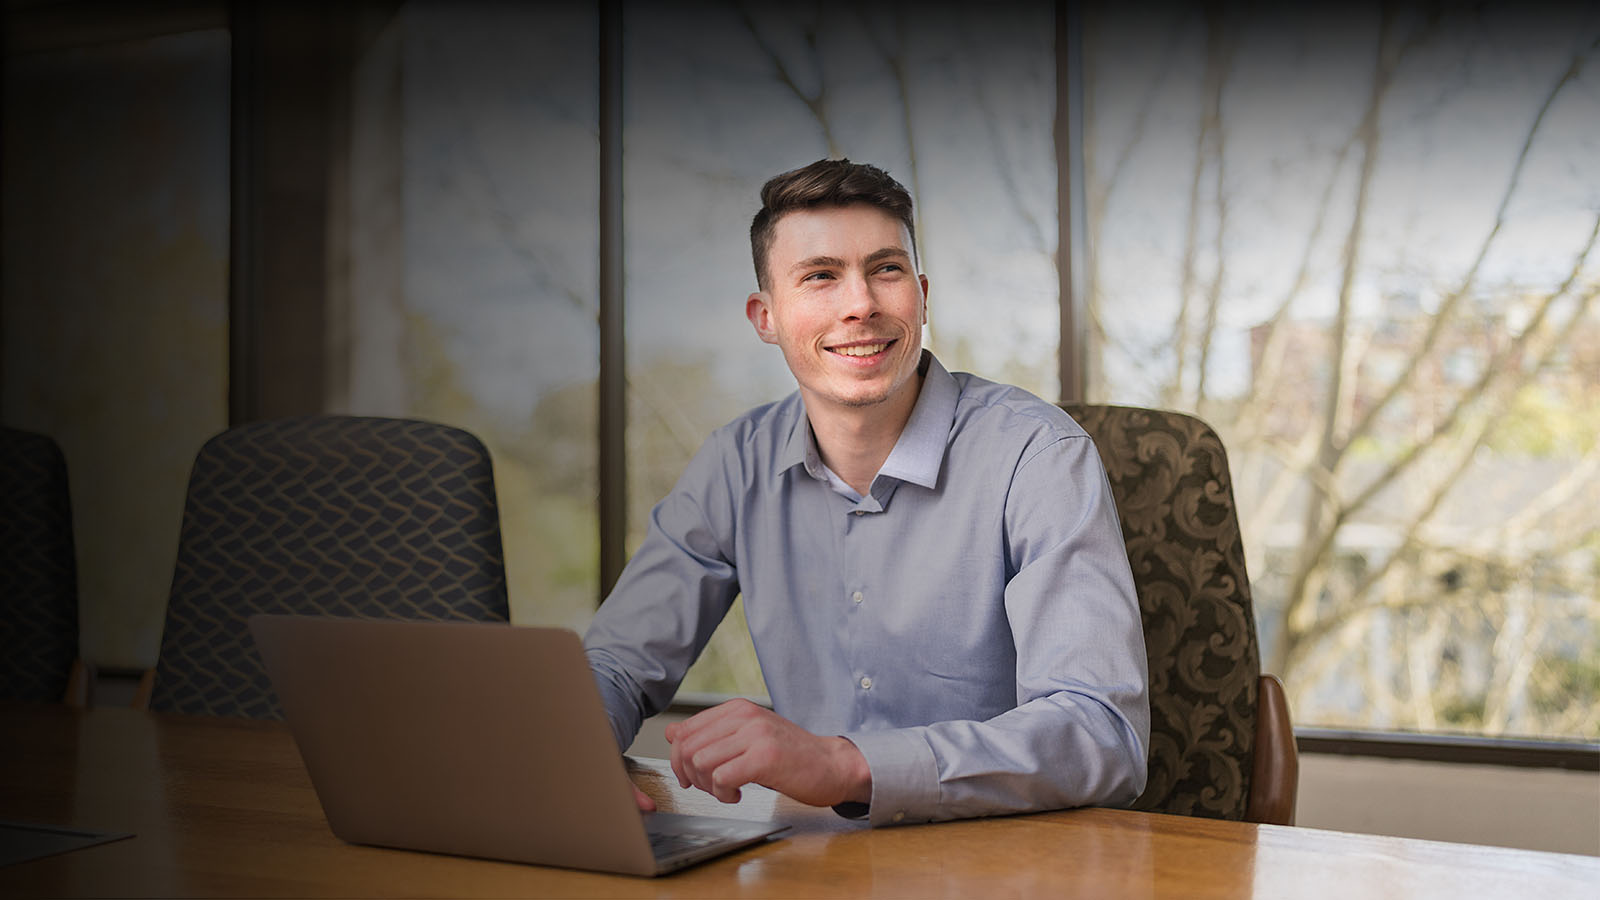 An MBA student at Willamette's Atkinson Graduate School of Management